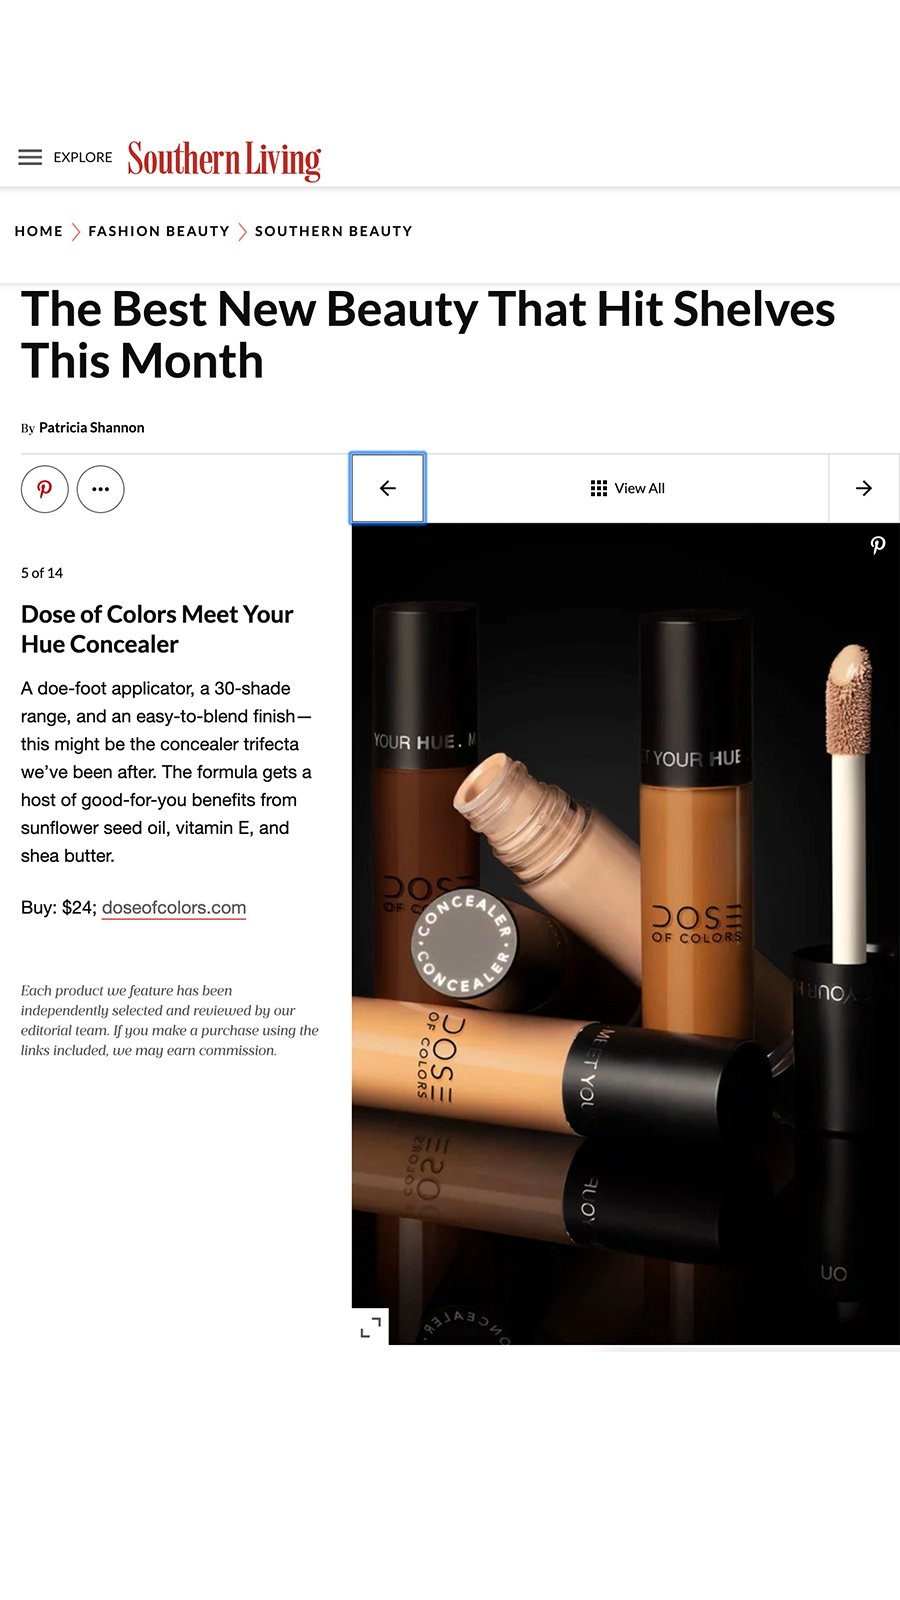 Southern Living - Meet your Hue Concealers